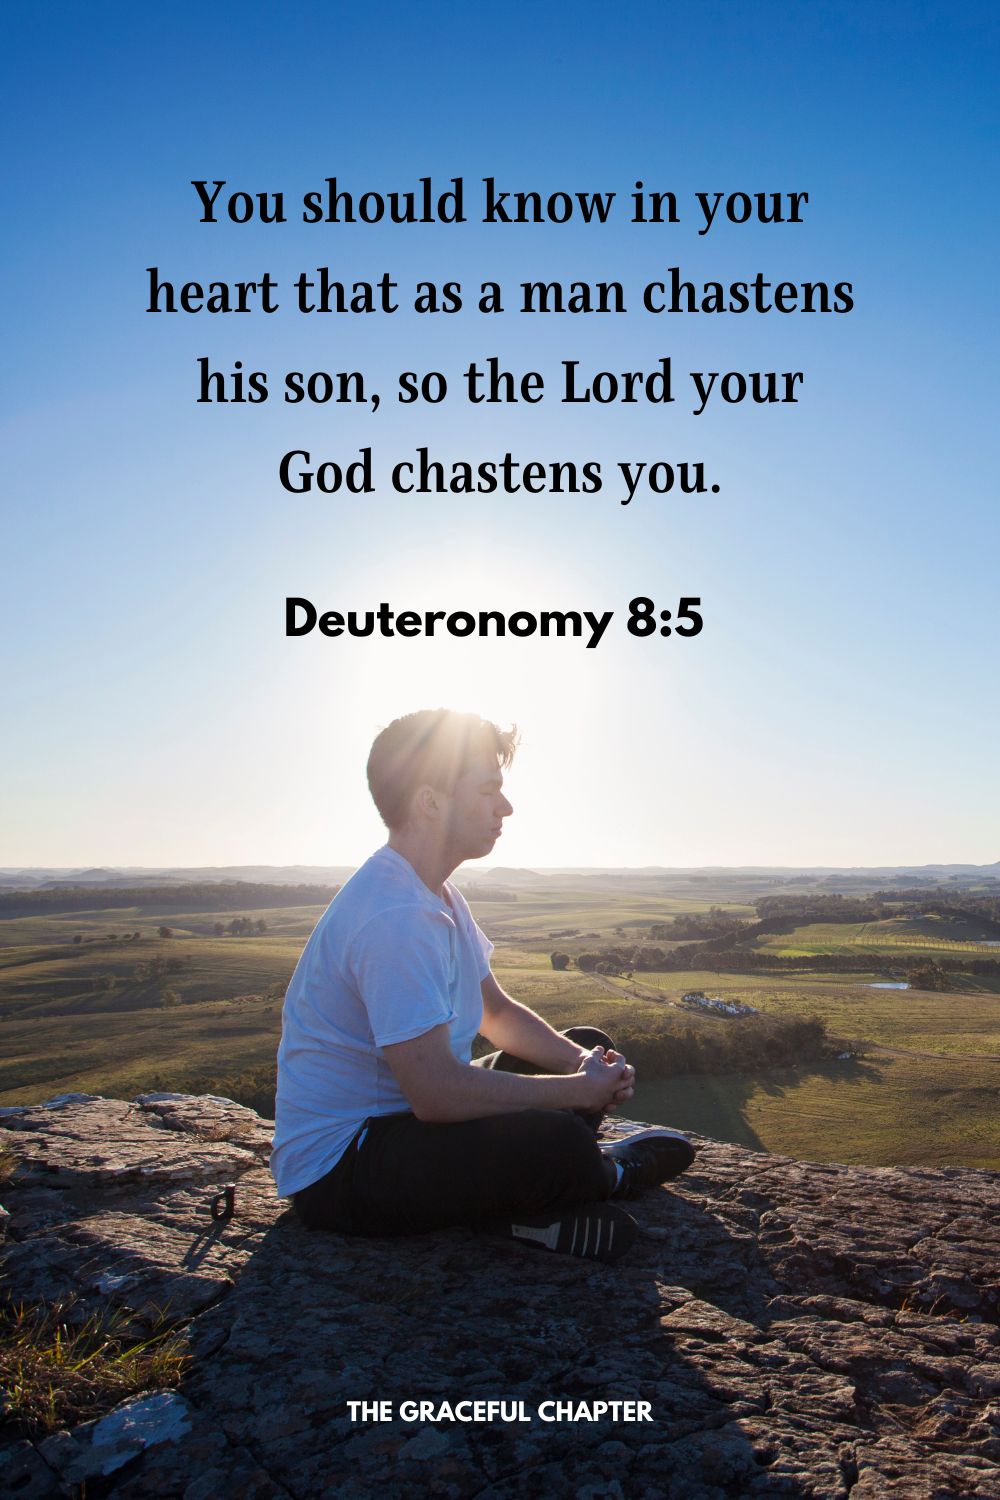 You should know in your heart that as a man chastens his son, so the Lord your God chastens you. Deuteronomy 8:5 